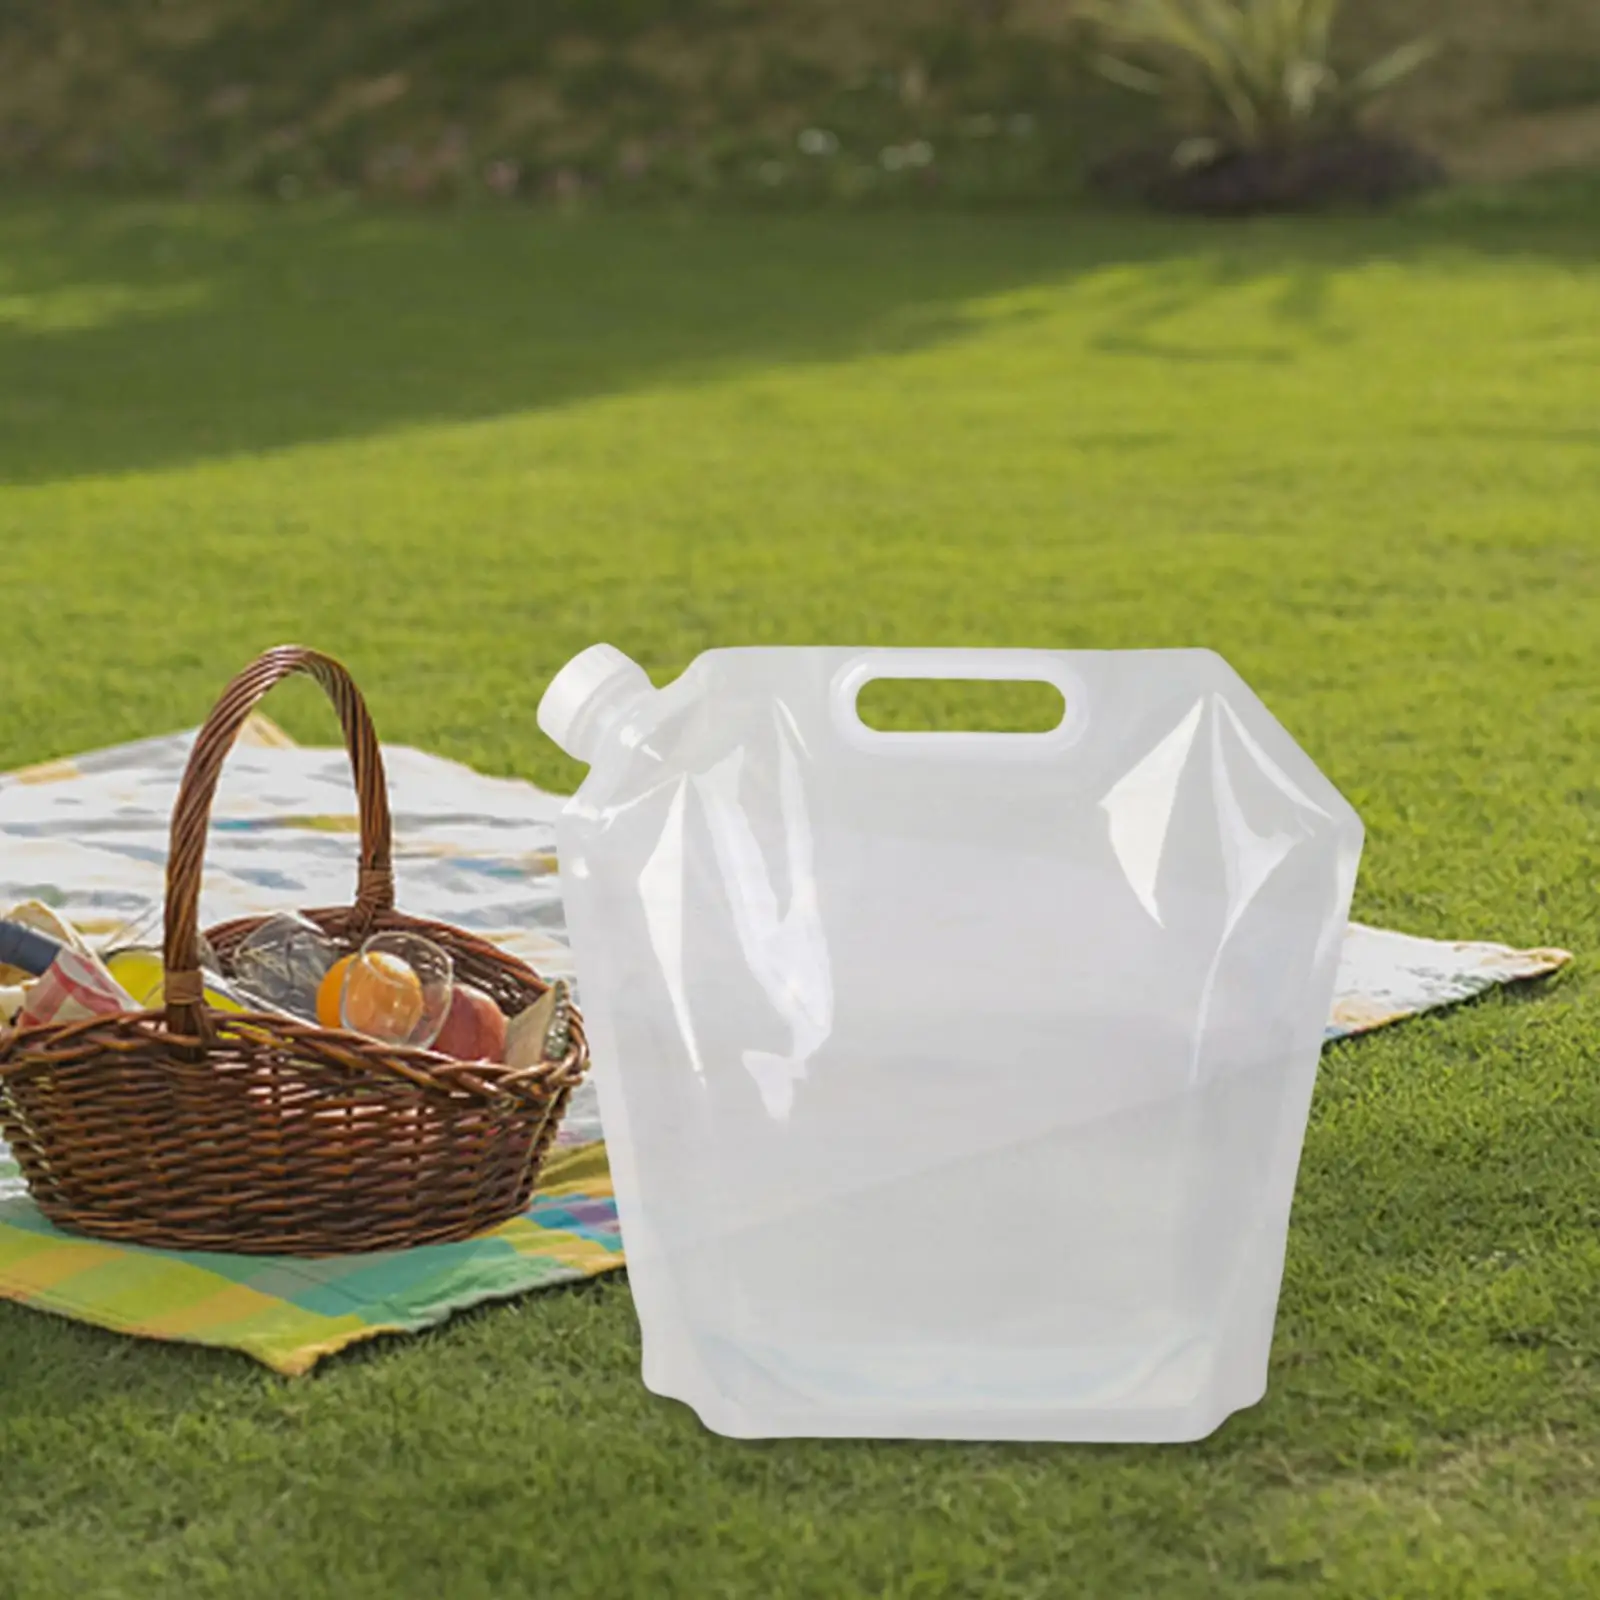 Foldable Water Tank Container Bag 5L Outdoor Drinking Tool Sturdy Refillable